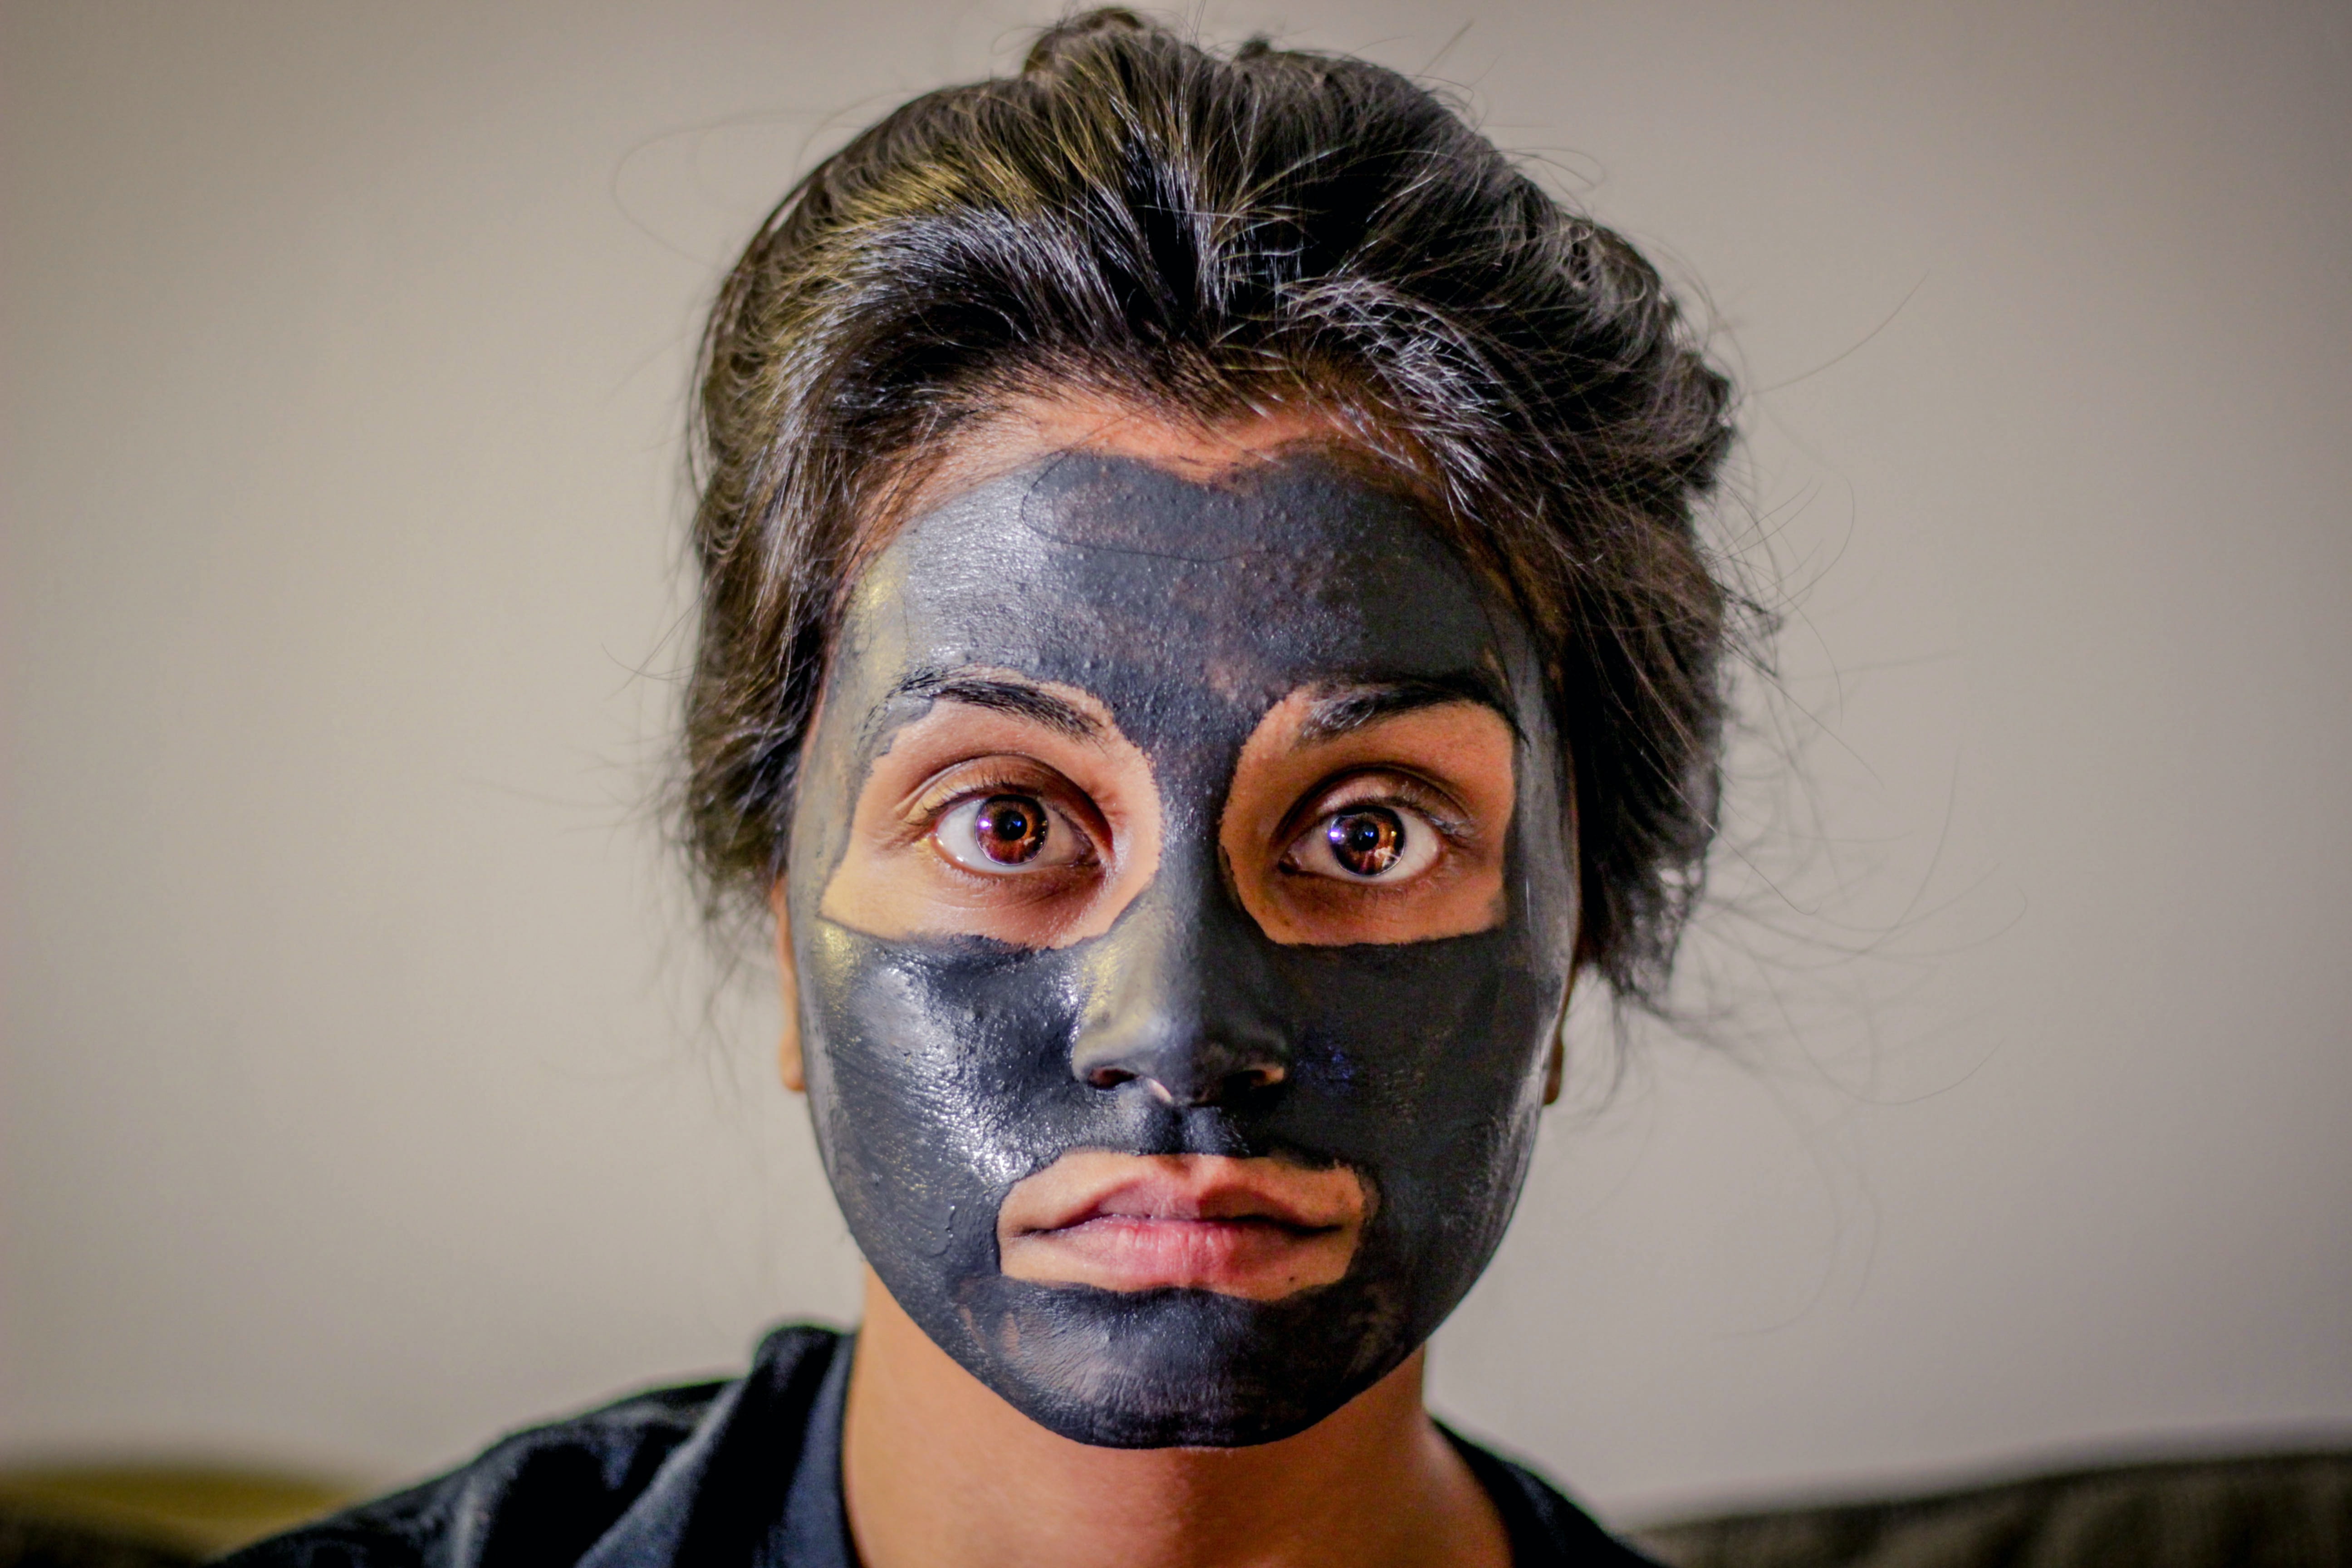 activated charcoal mask